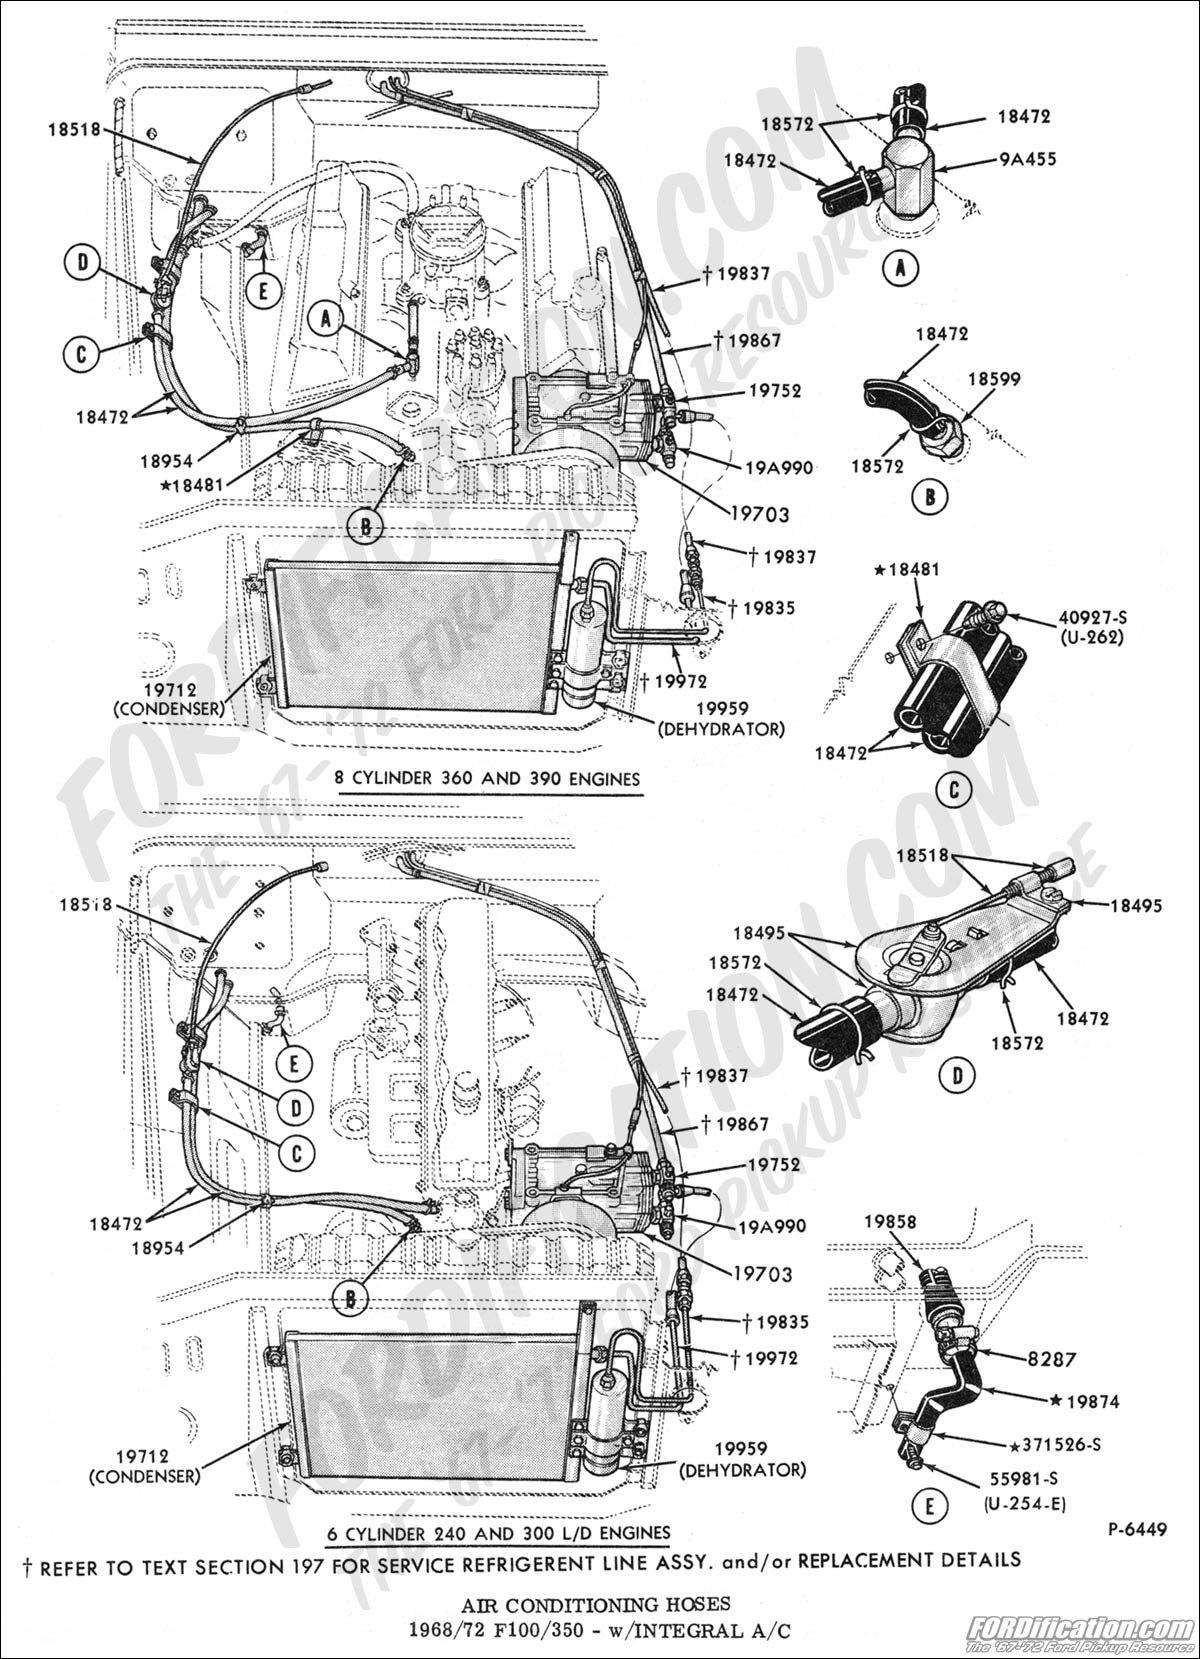 2001 Ford expedition hvac schematic #8